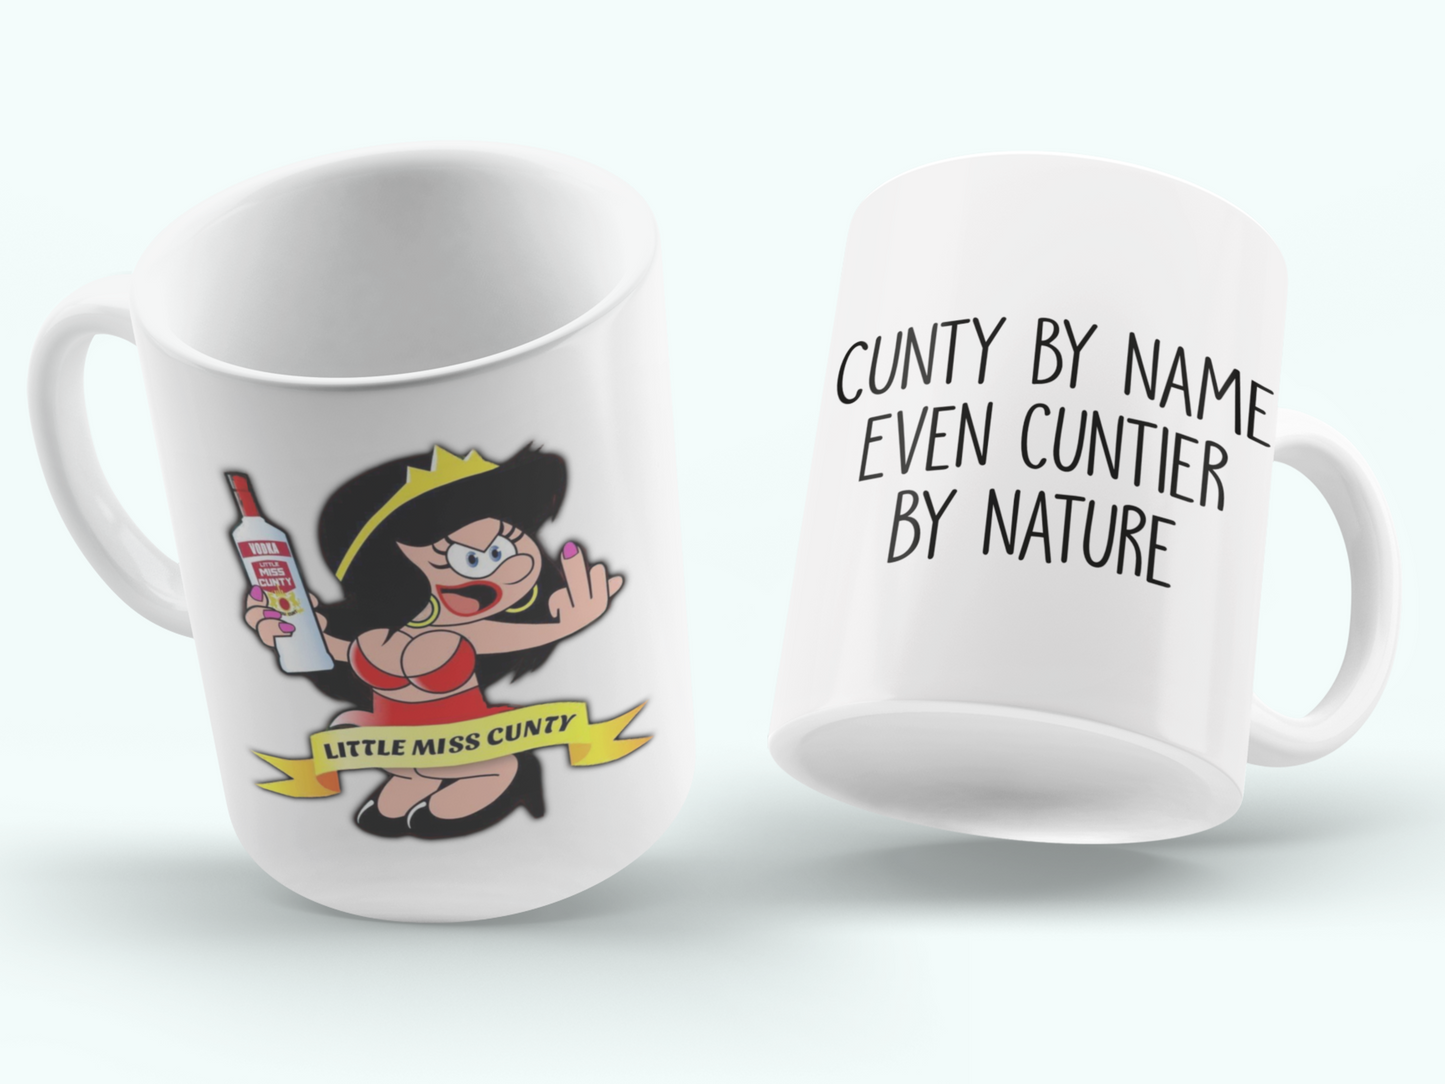 White mug with a design of a cartoon woman sticking her middle finger up & the quote little miss cunty, to the back of the mug it says cunty by name even cuntier by nature.